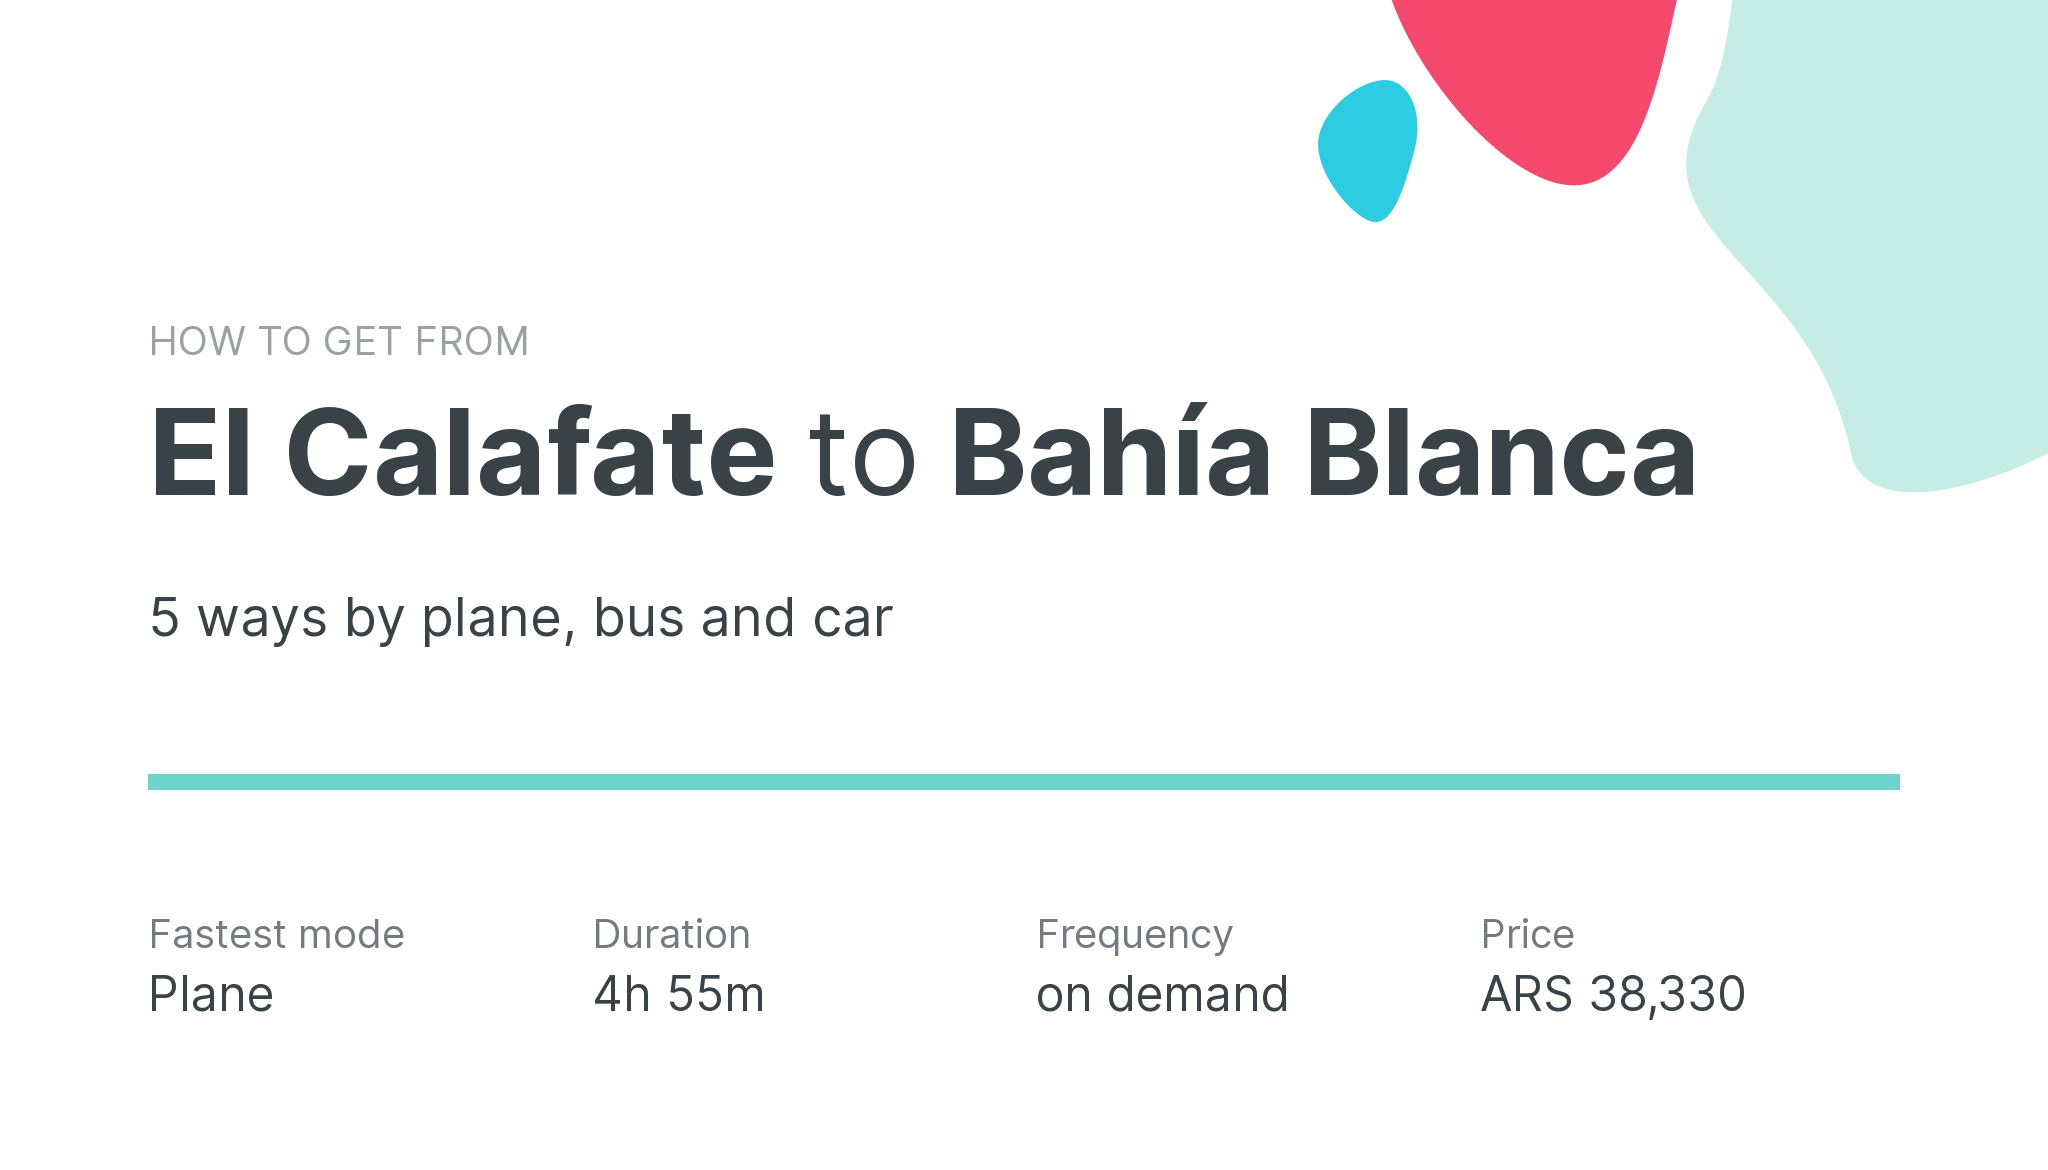 How do I get from El Calafate to Bahía Blanca